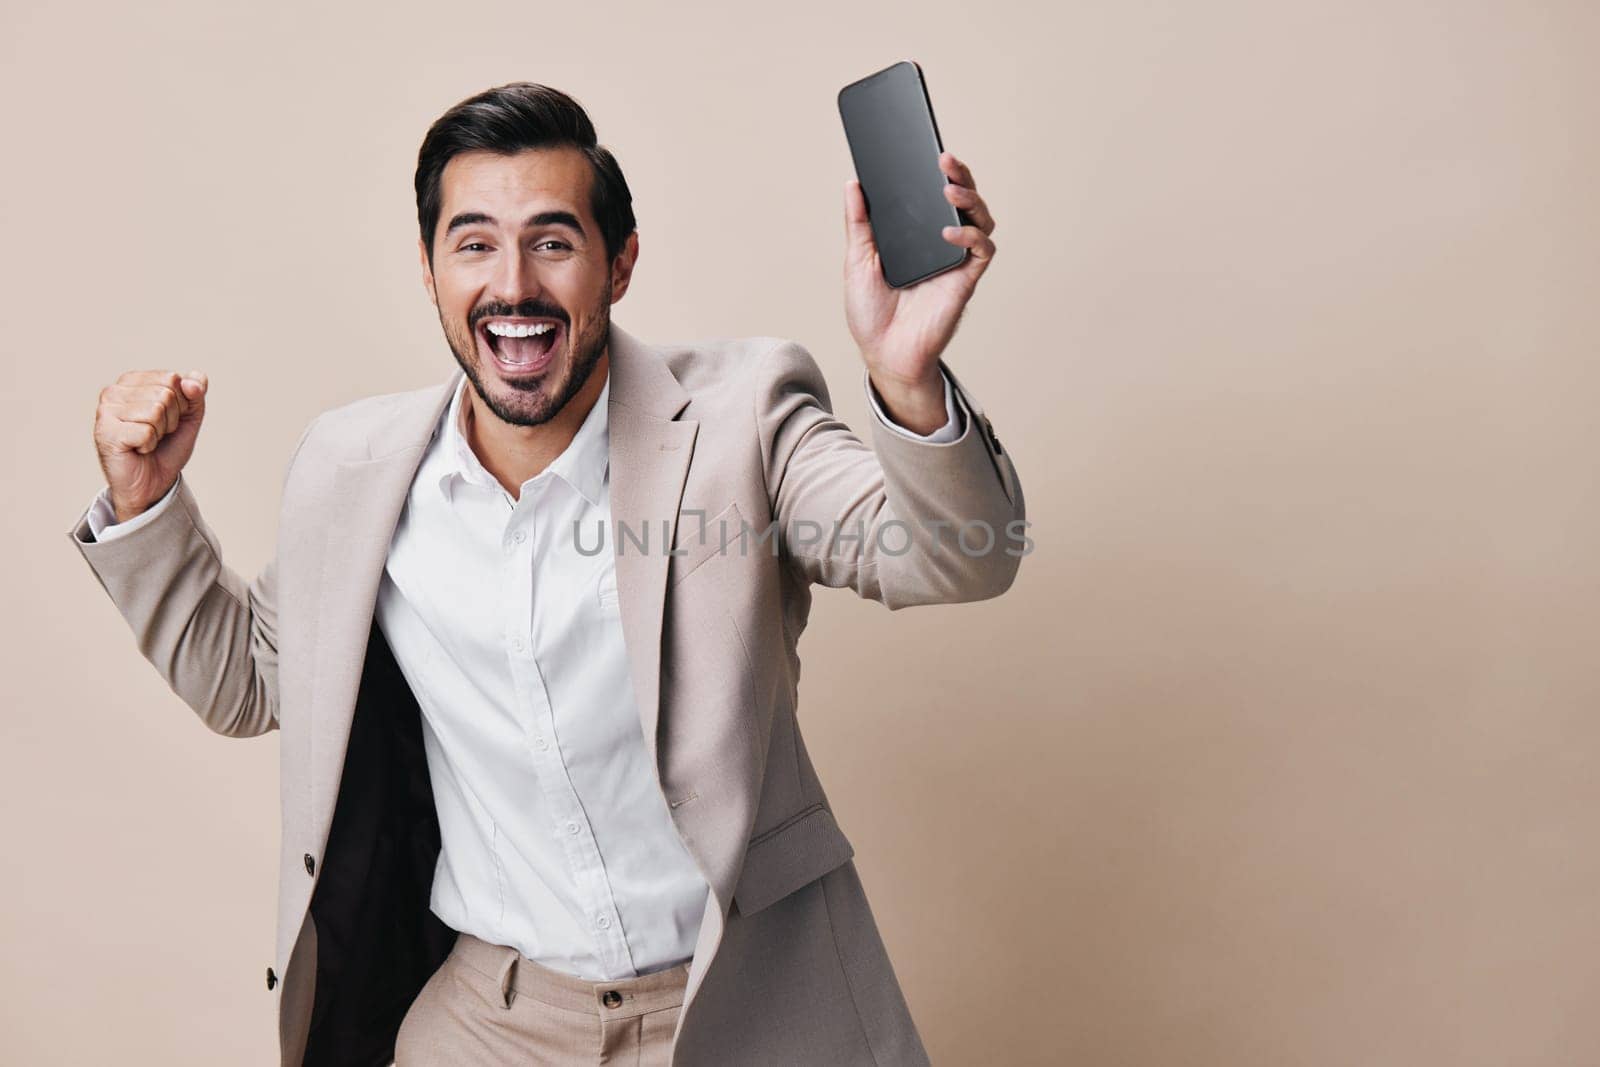 cellphone man corporate business call happy phone suit message mobile businessman smile smartphone portrait cell confident trading hold holding white technology